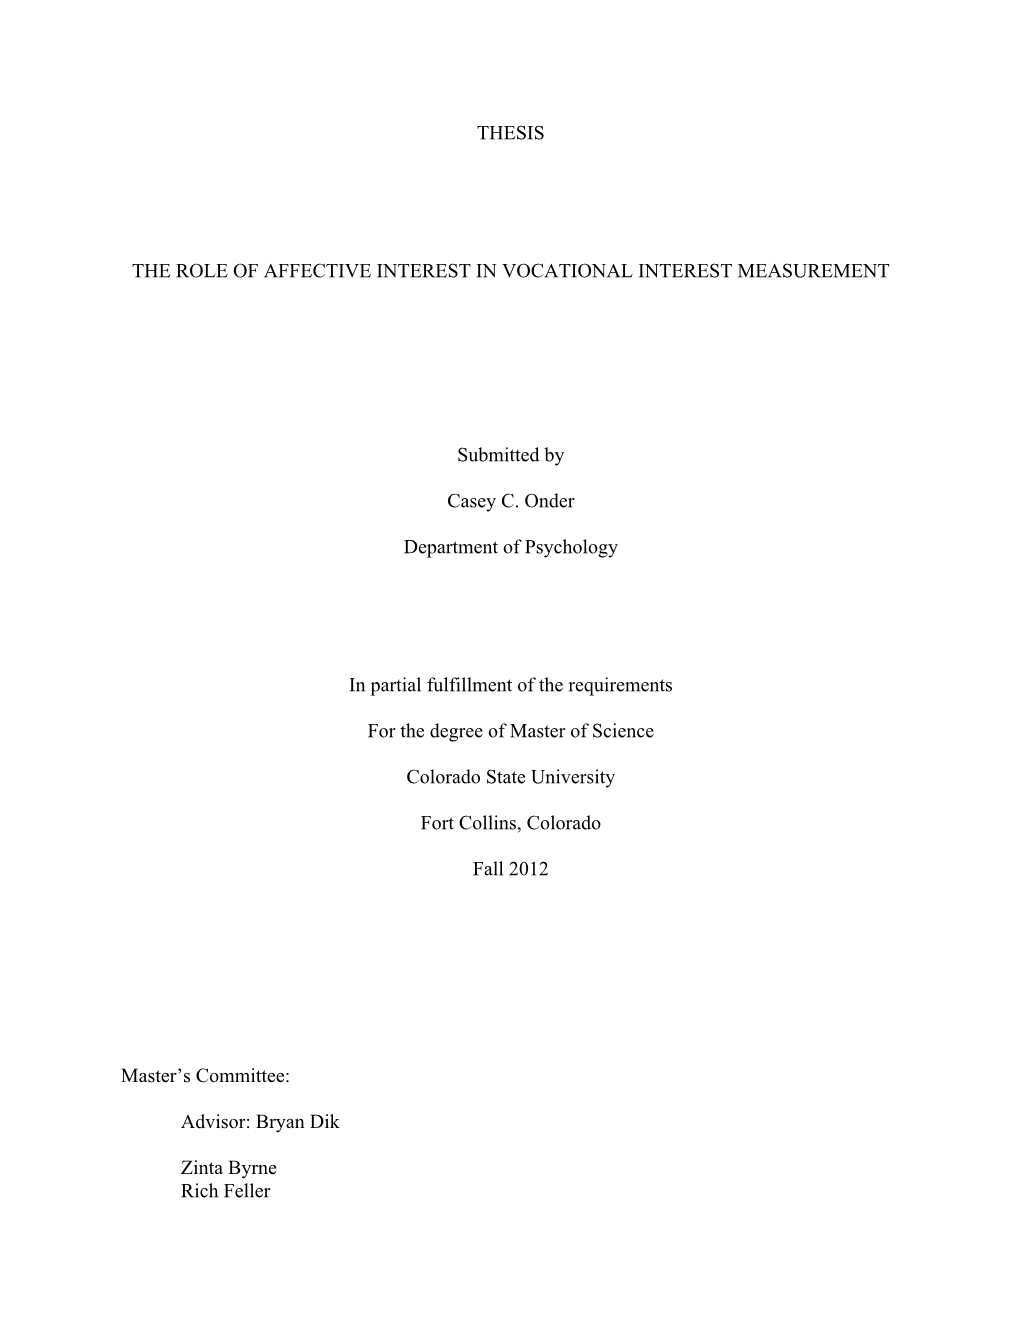 Thesis the Role of Affective Interest in Vocational